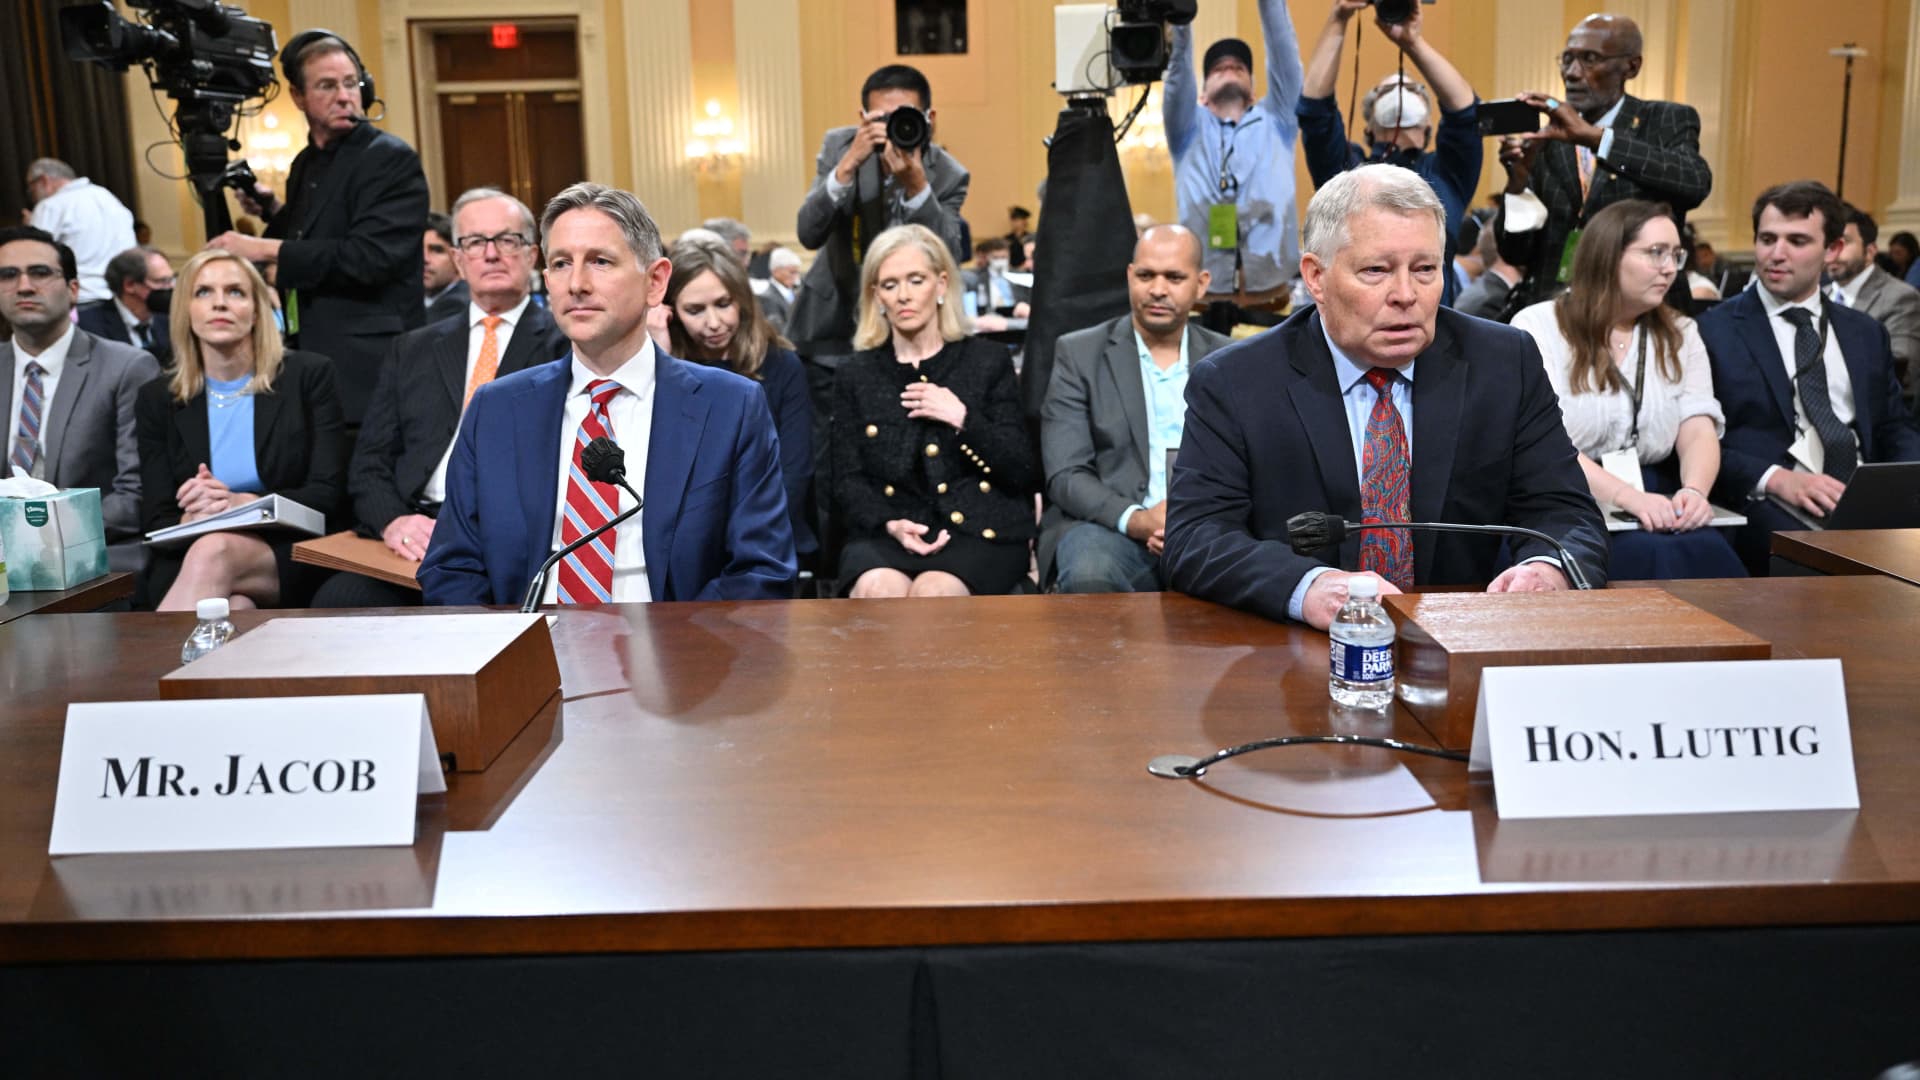 Former Counsel to Vice President Mike Pence, Greg Jacob (L), and Retired judge and and informal advisor to Vice President Mike Pence, J. Michael Luttig (R), arrive to testify during the third hearing of the US House Select Committee to Investigate the January 6 Attack on the US Capitol, on Capitol Hill in Washington, DC, on June 16, 2022.